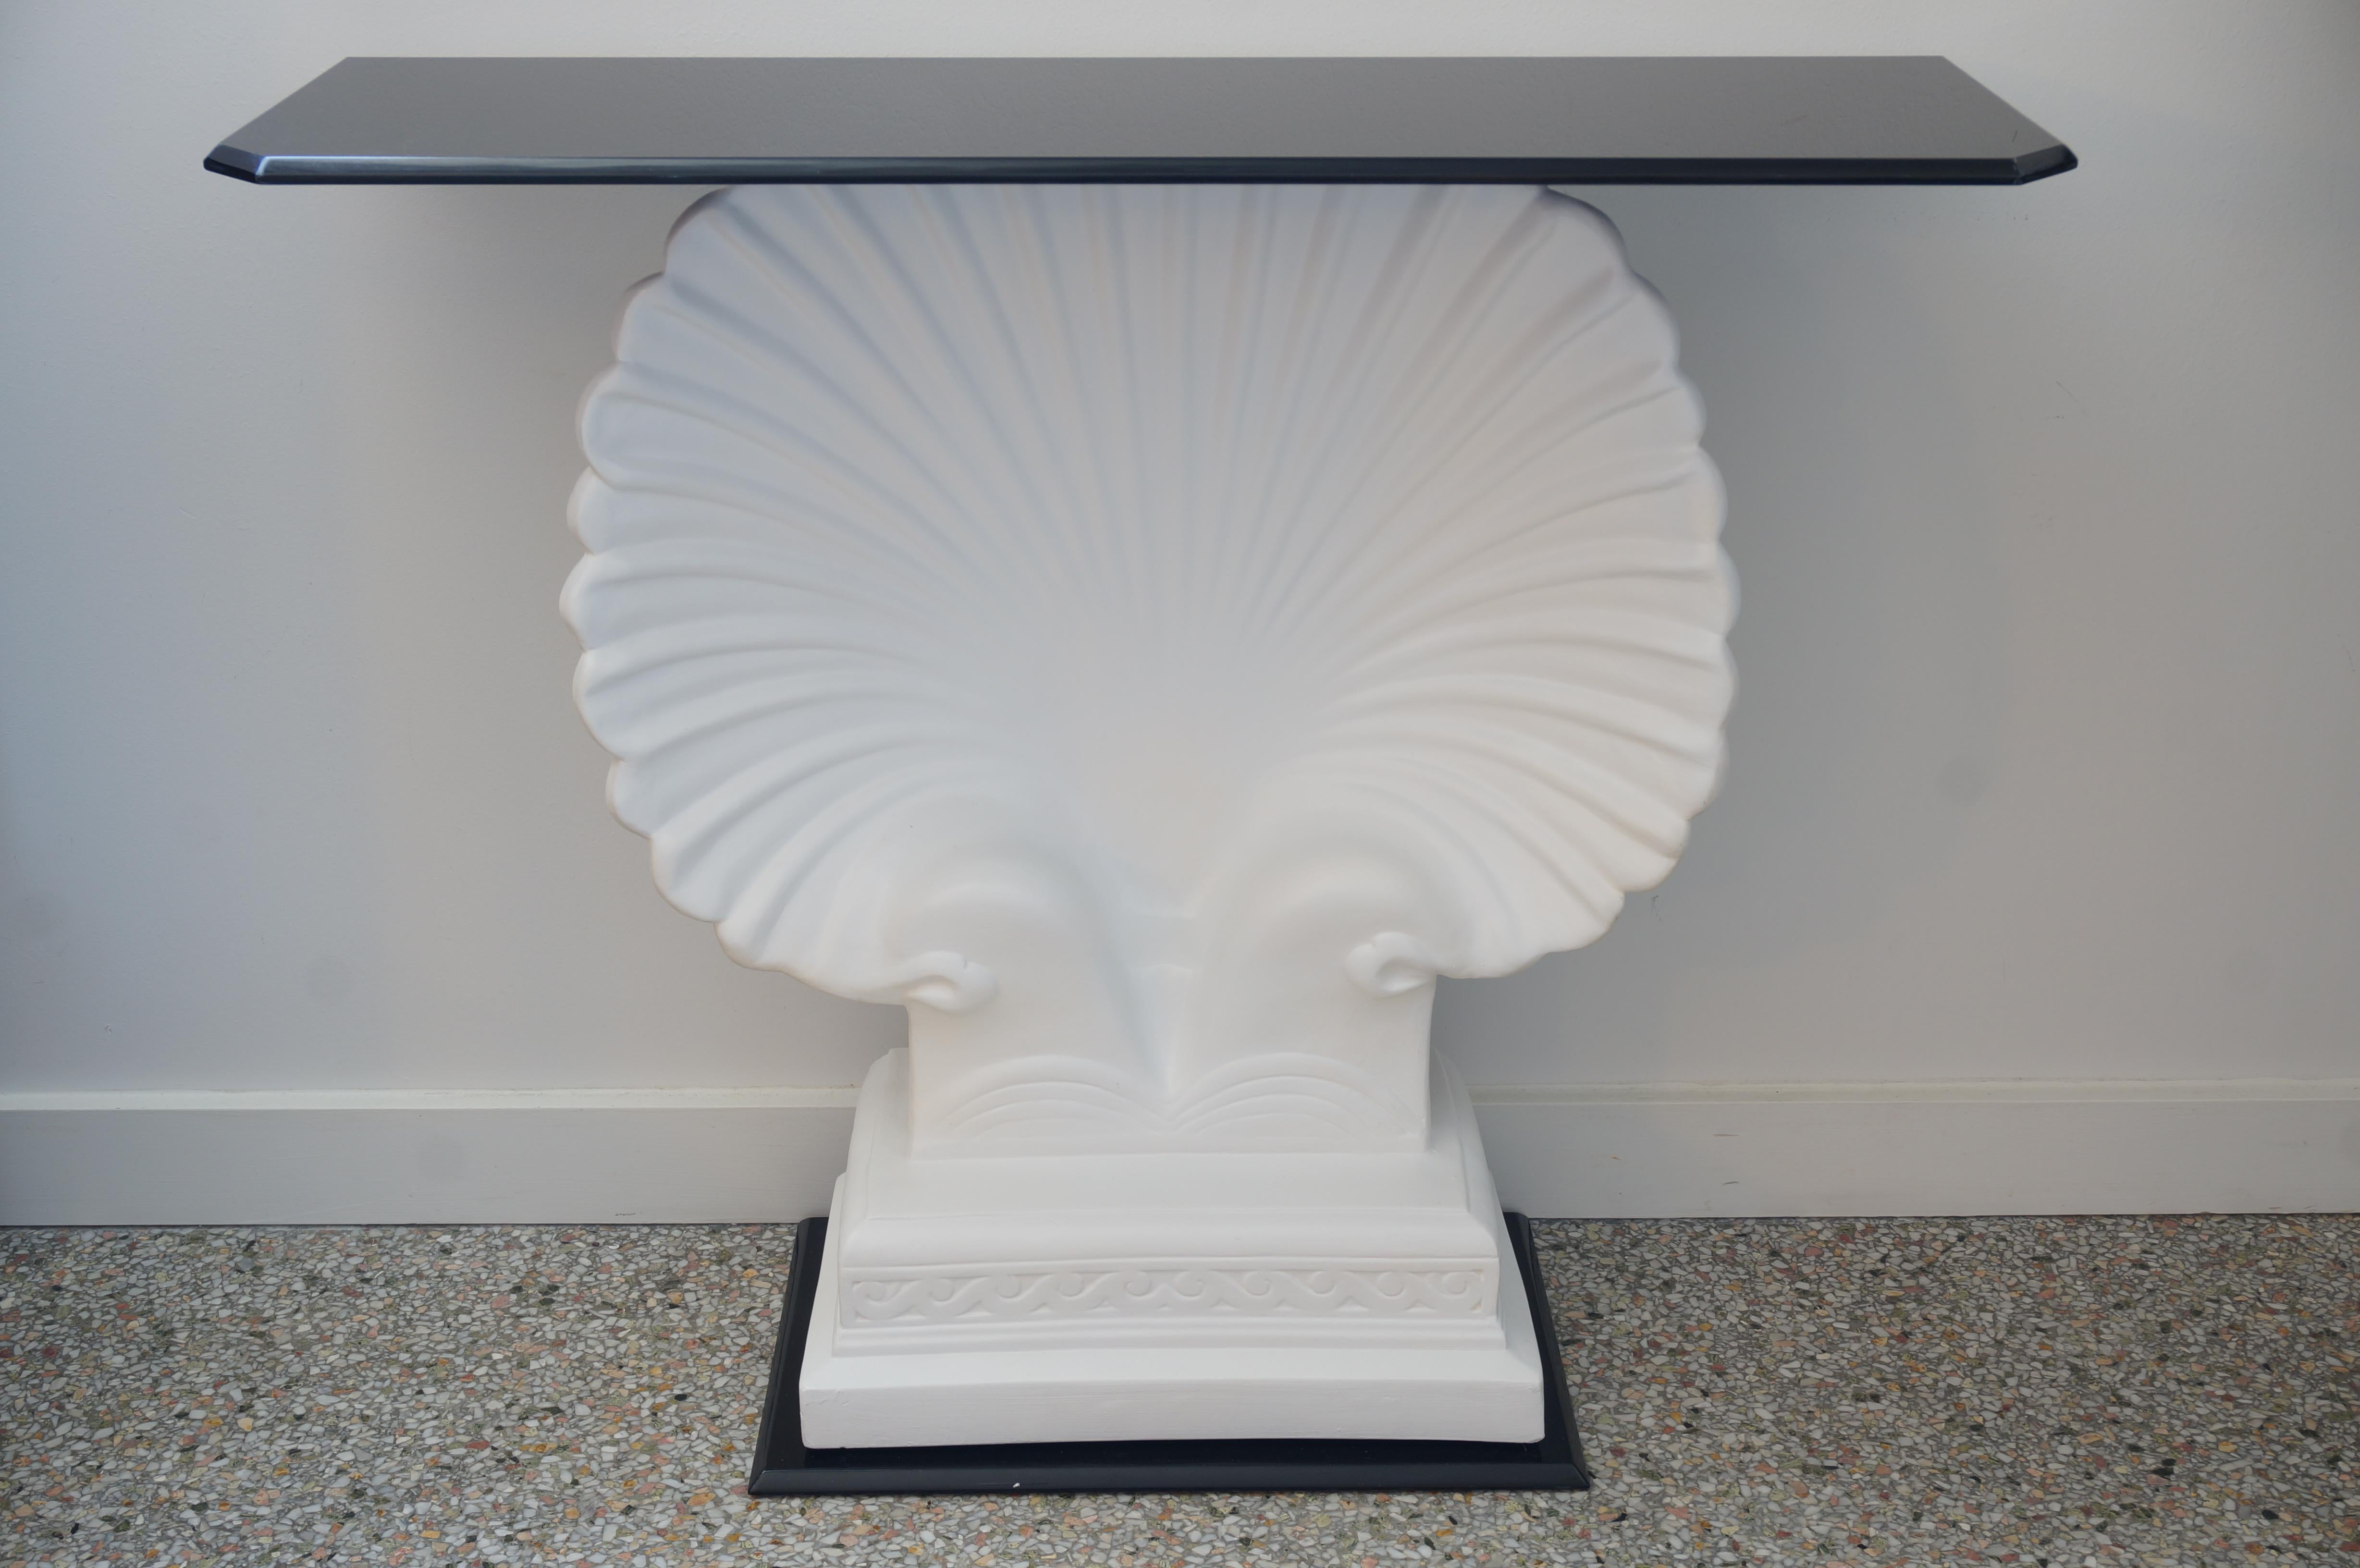 This stylish and chic clamshell form console table is a custom one-of-a-kind design and fabrication from Iconic Snob Galeries. The clamshell itself is made of cast plaster that has been pained white and the base and top are black lucite.

Note: